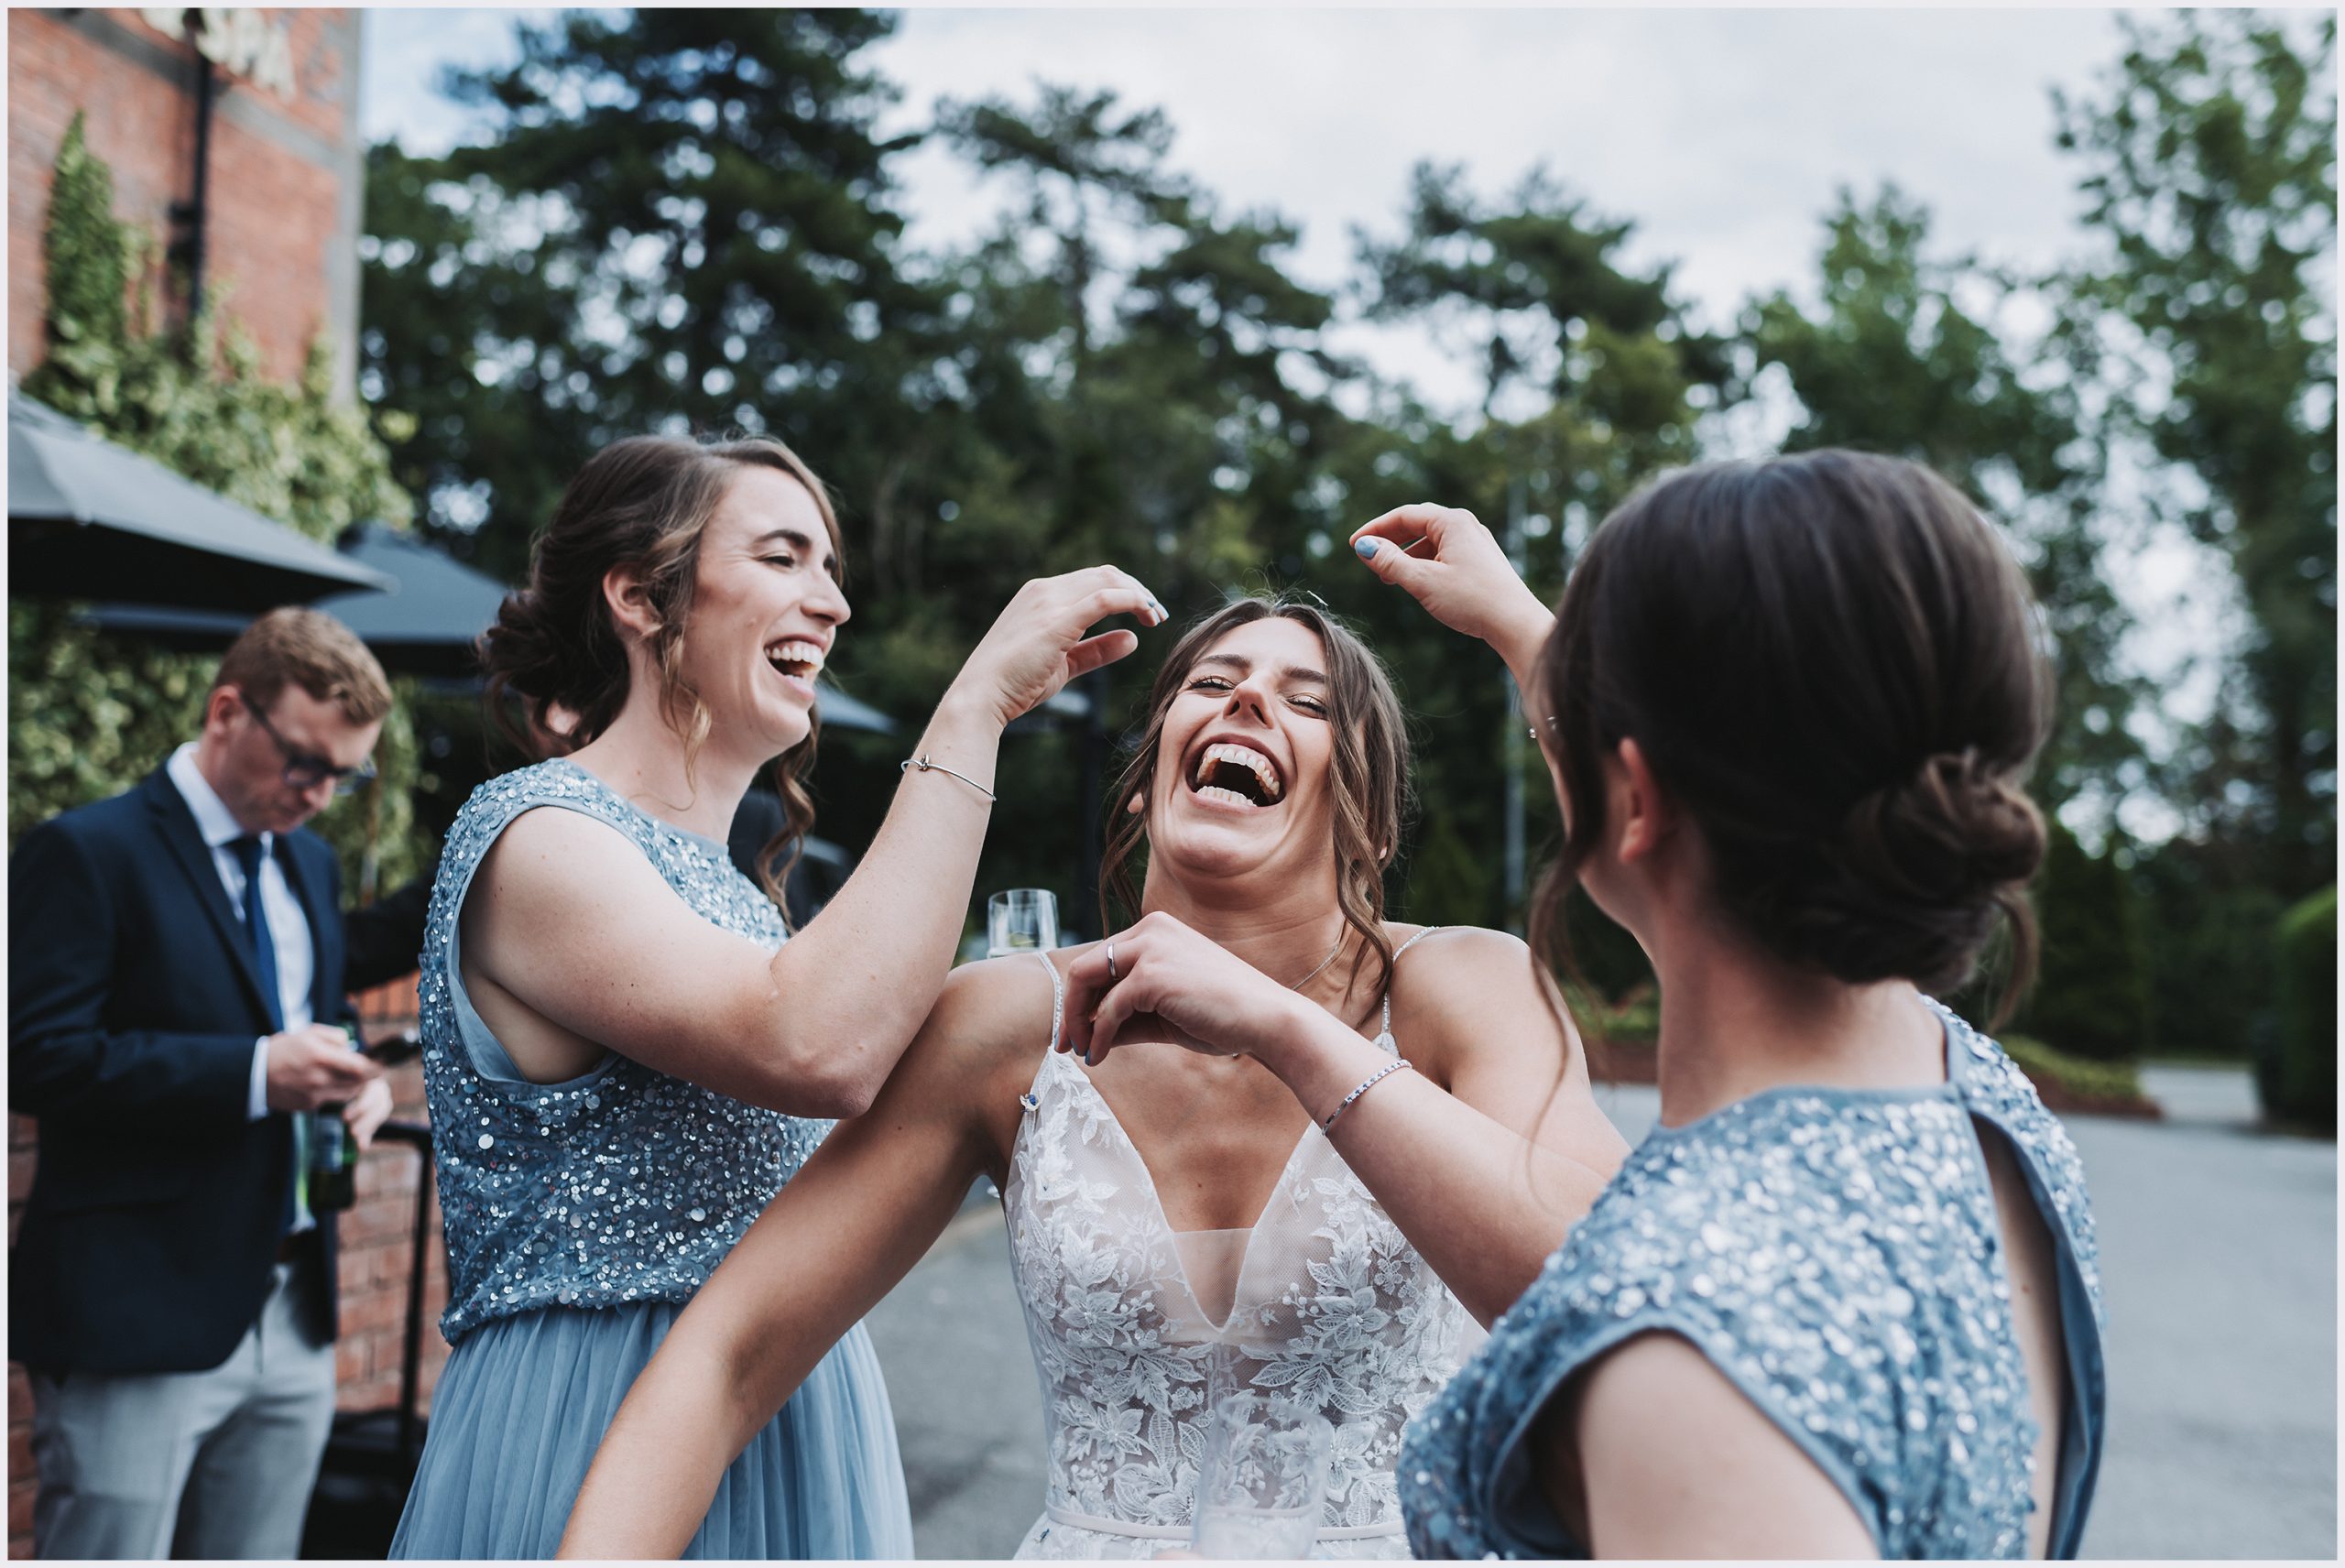 A bride with her head thrown back laughs as her bridesmaids remove confetti from her hair.  Image captured by Grosvenor Pulford Hotel and Spa wedding photographer Helena Jayne Photography